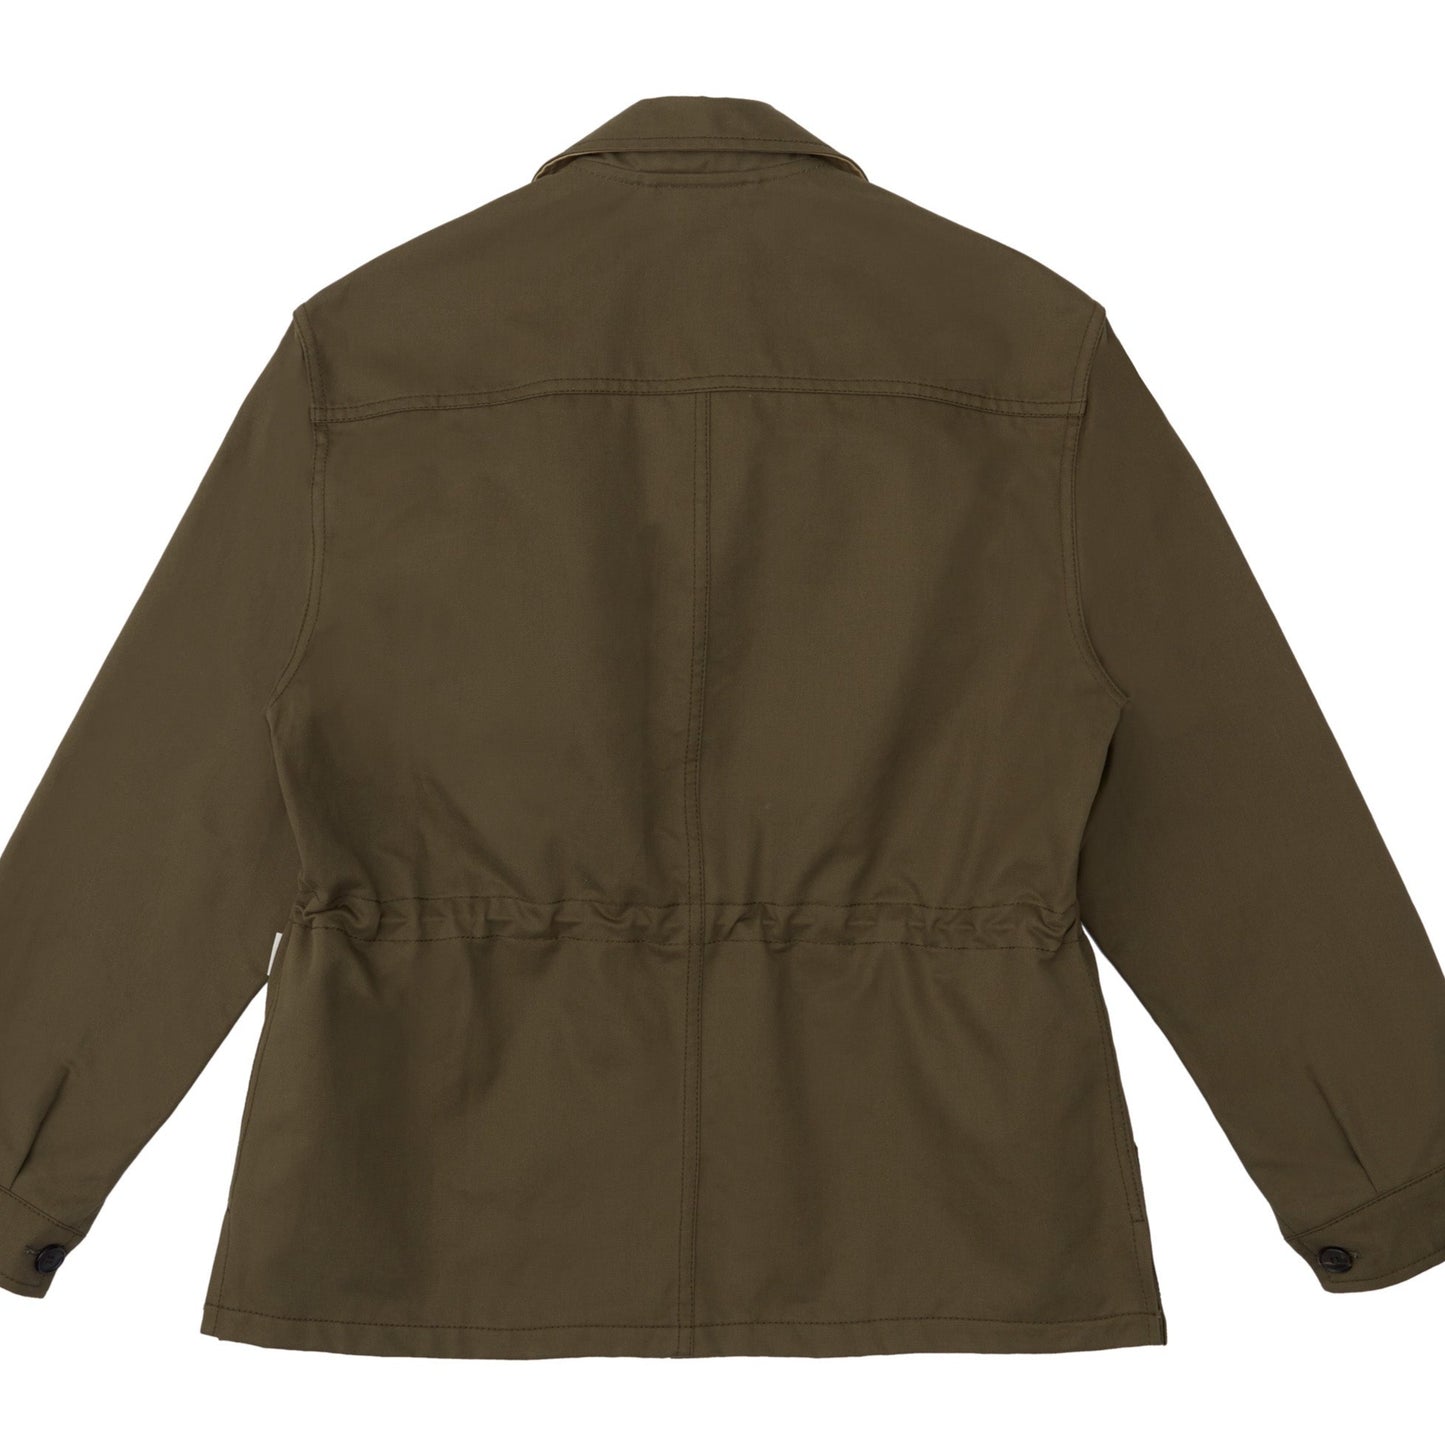 Unlined Garden Jacket in Green and Beige Cotton Twill